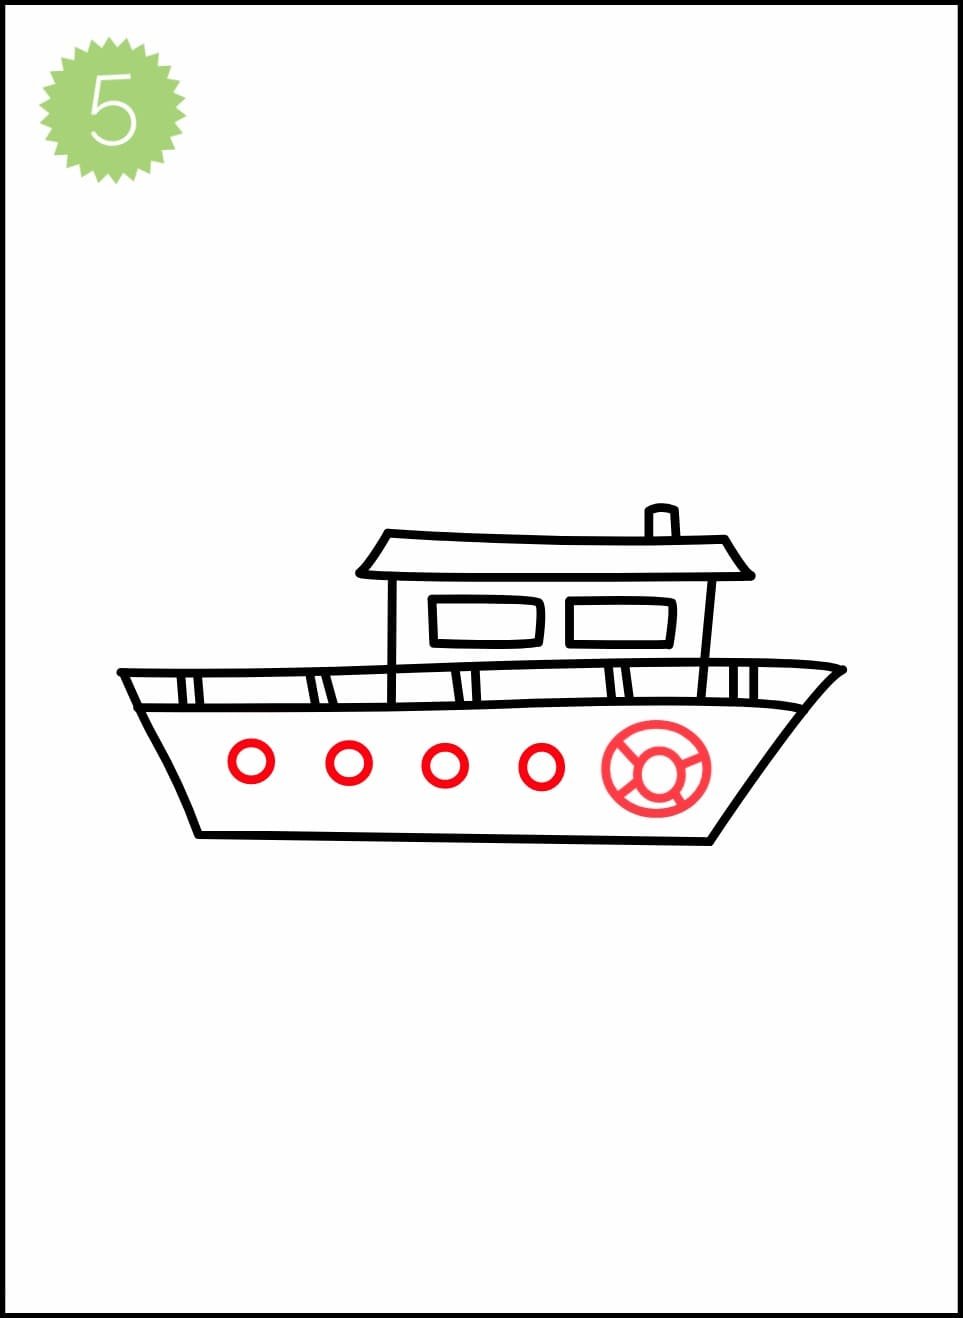 Sailing Ship Coloring Page  Pirate Ship Simple Drawing PNG Image   Transparent PNG Free Download on SeekPNG